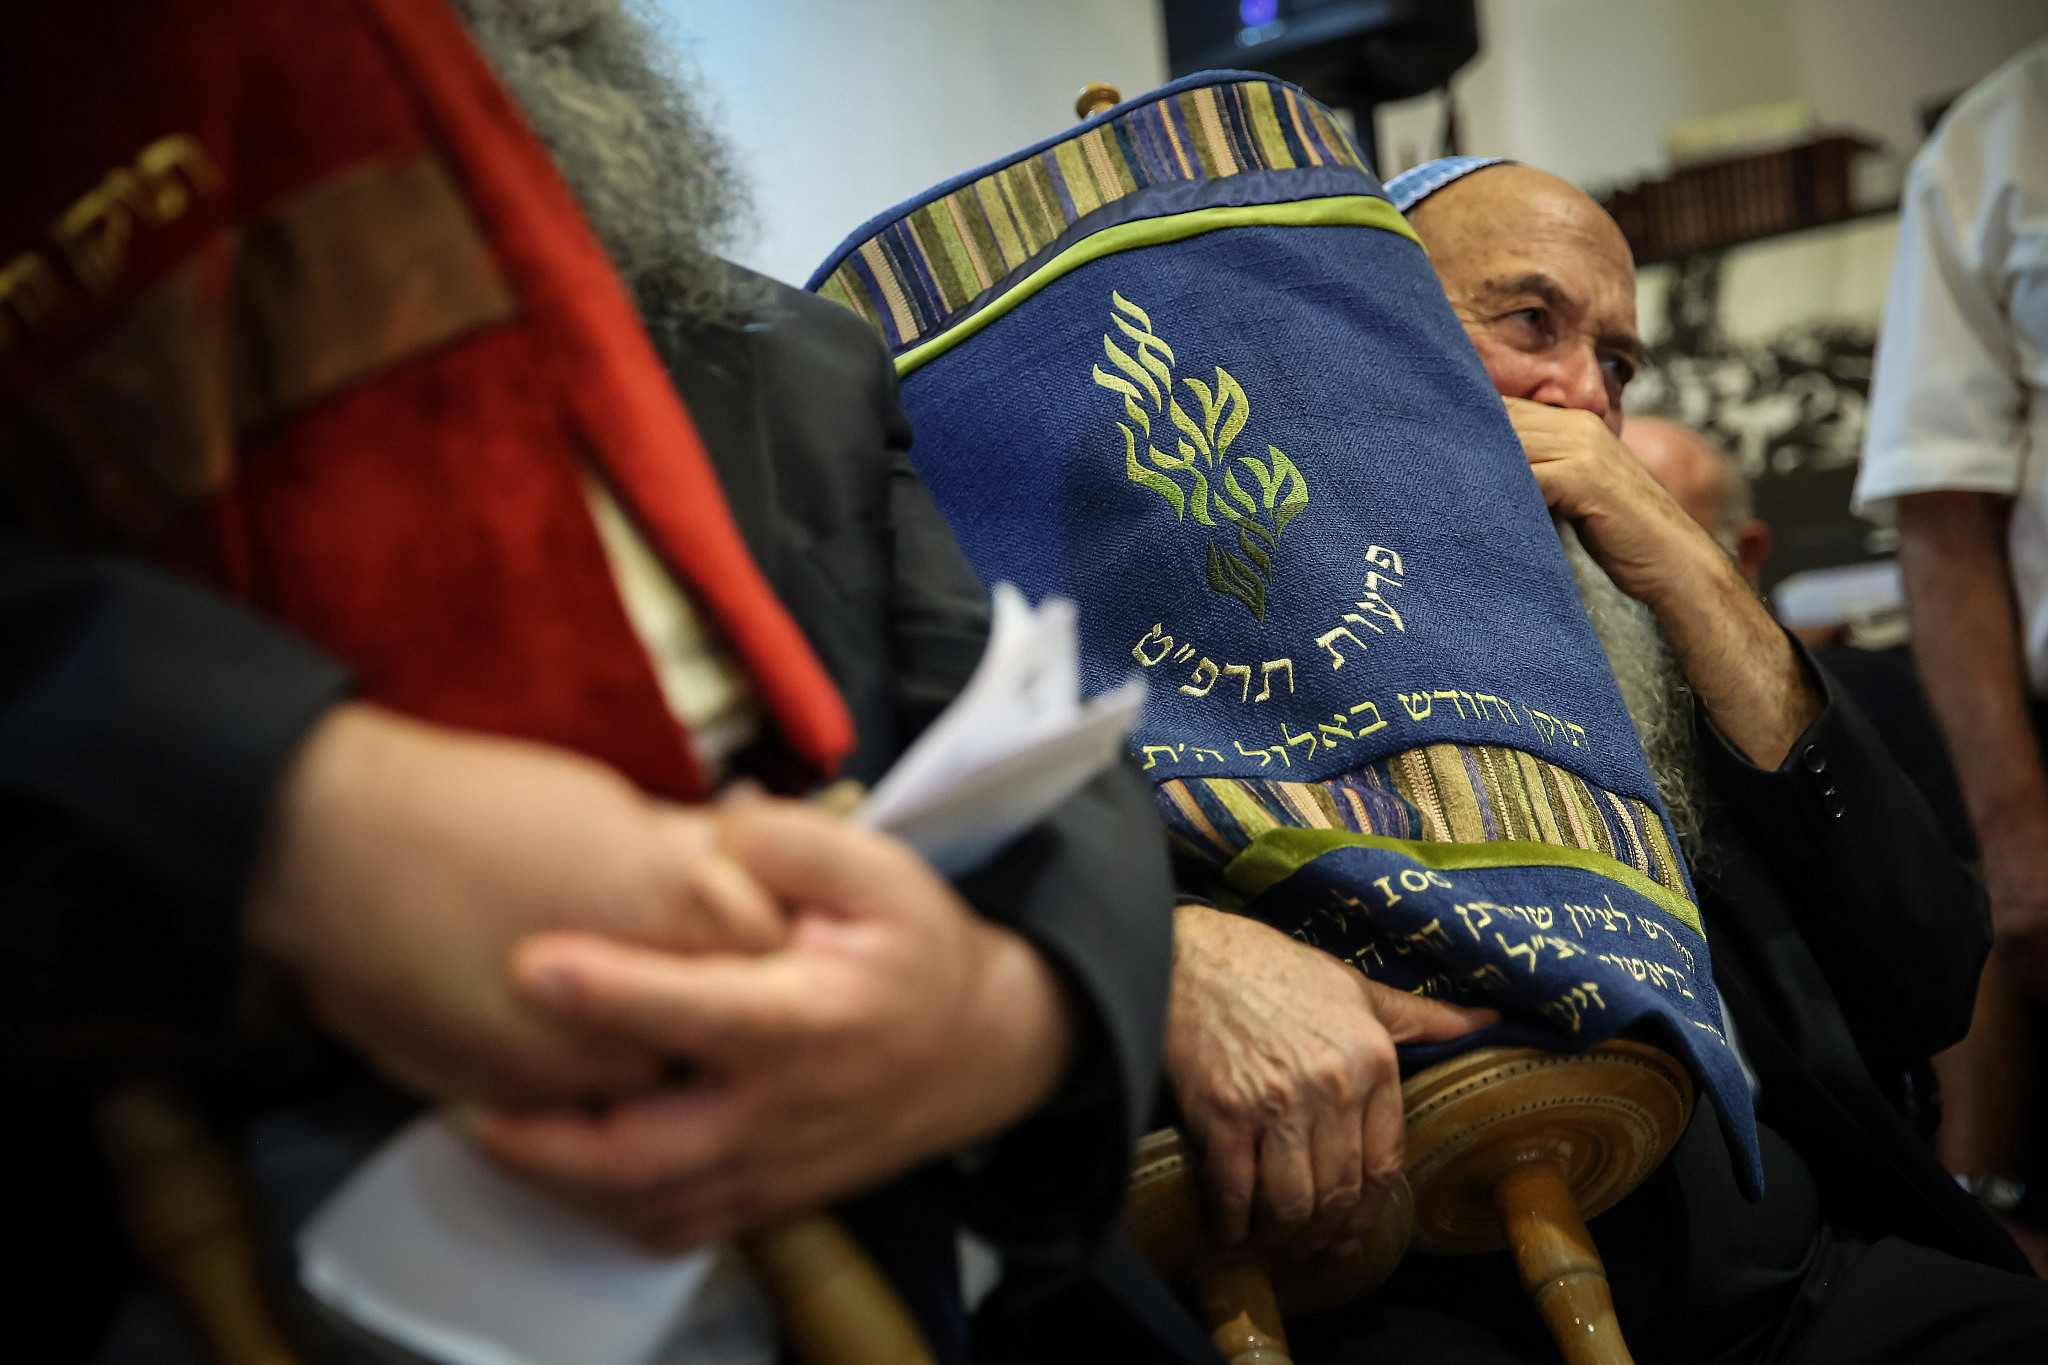 Men hold restored Torah scrolls which were desecrated in the 1929 Western Wall Uprisings (Tarpat), during a ceremony at the Rabbi Kook House, in Jerusalem, August 26, 2014. (Uri Lenz/POOL/Flash90)